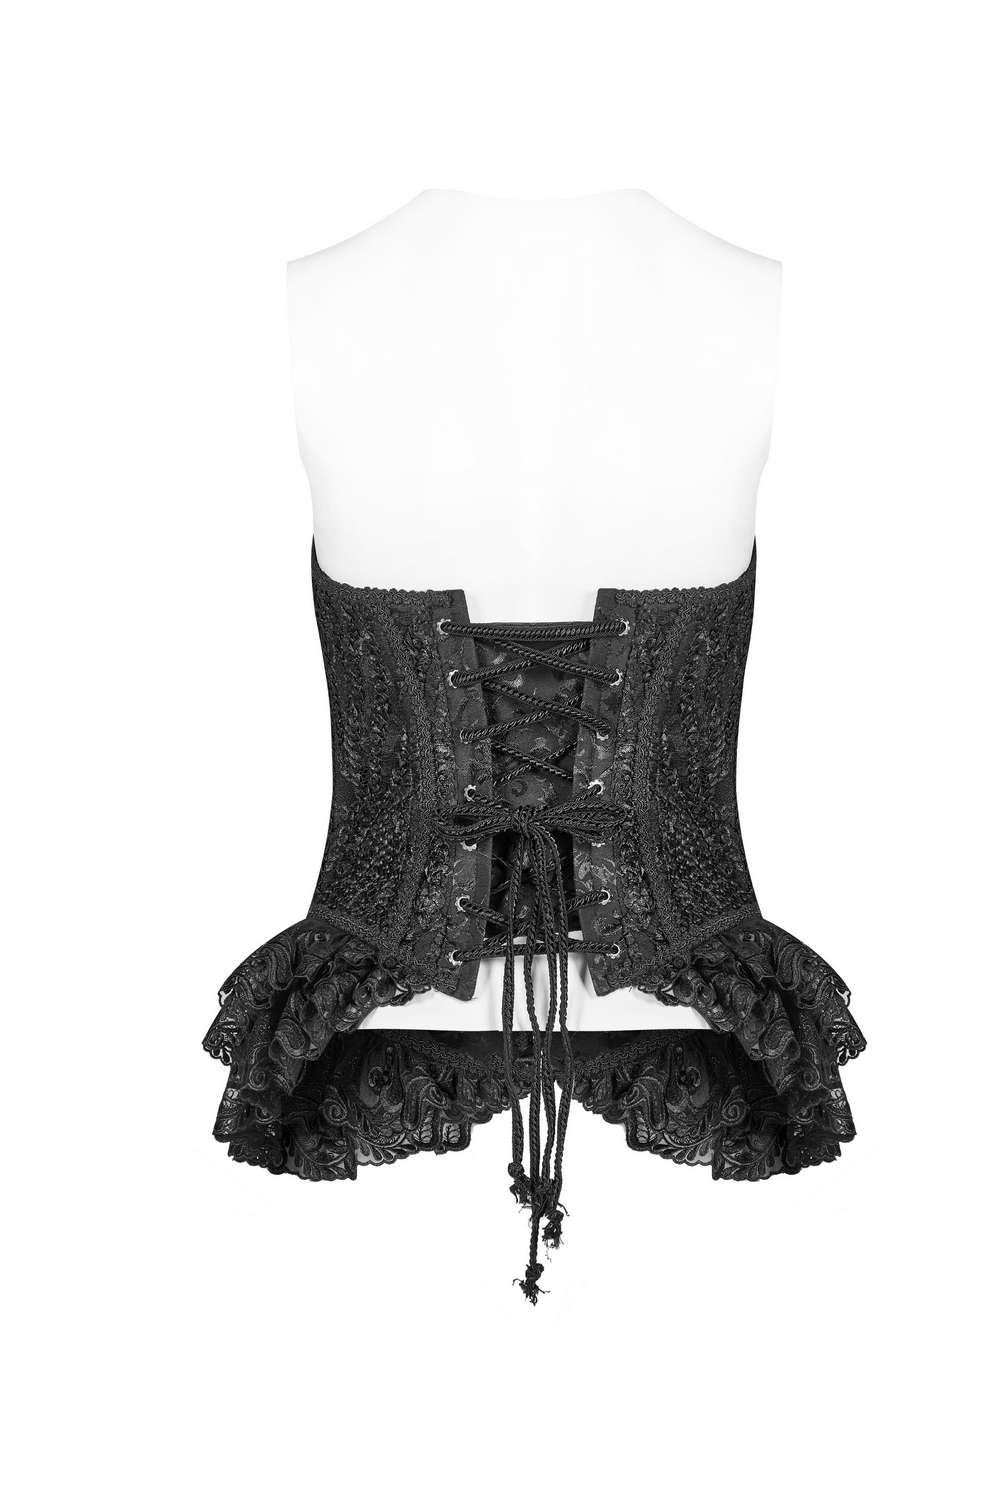 Elegant Lace Corset with Ruffled Hem and Intricate Details